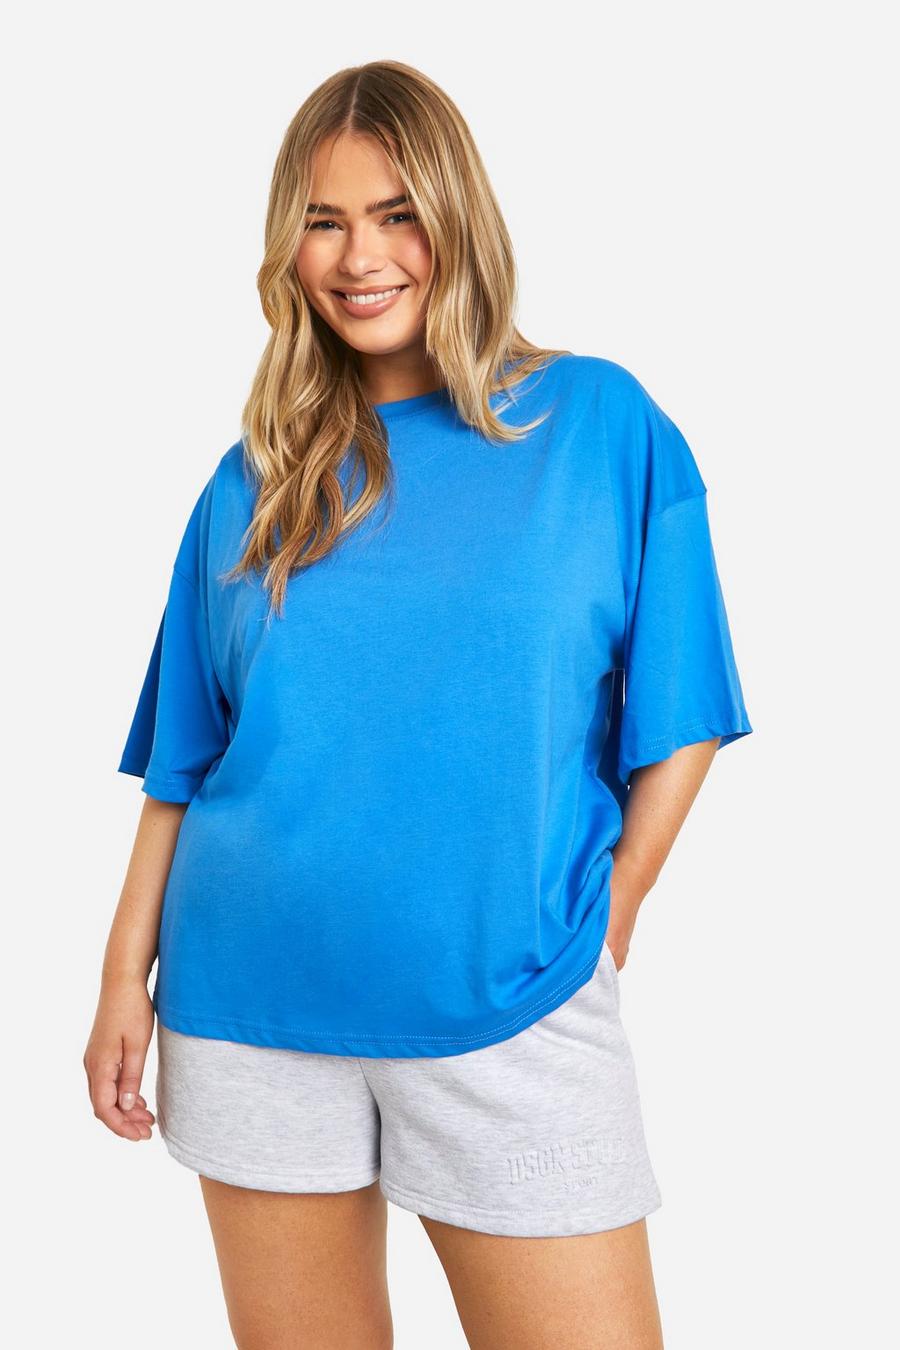 T-shirt Plus Size oversize Basic a girocollo in cotone Brights, Cobalt